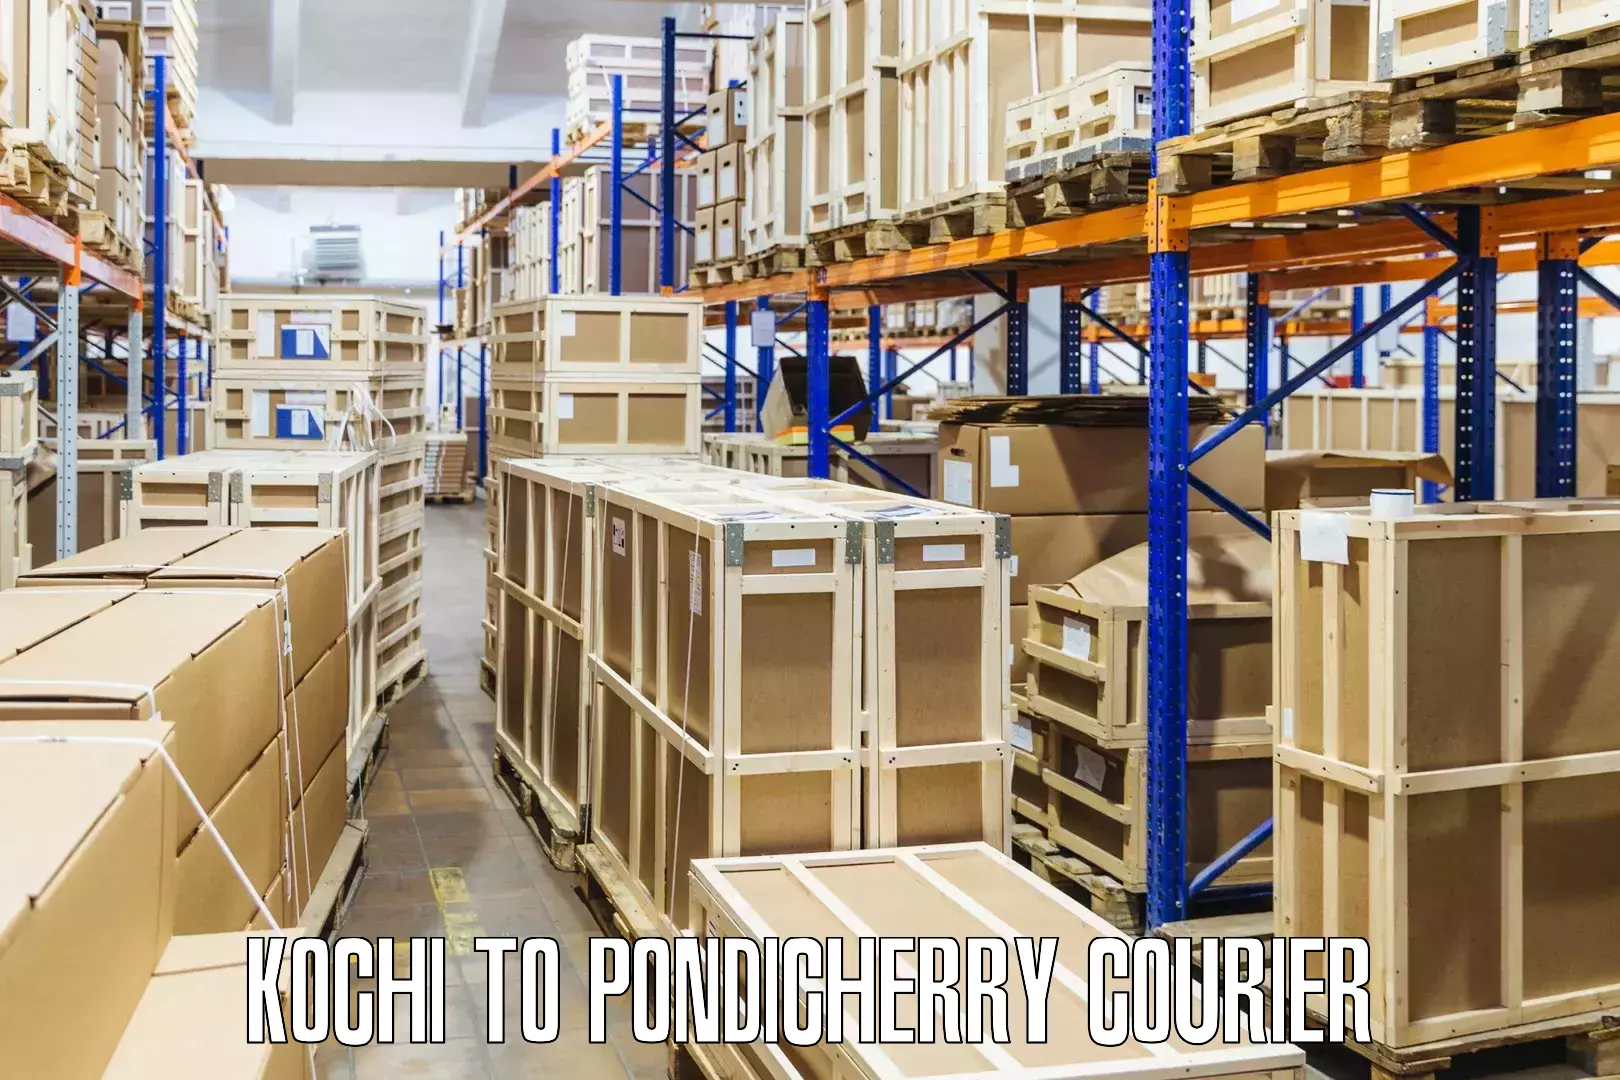 Affordable parcel rates Kochi to Pondicherry